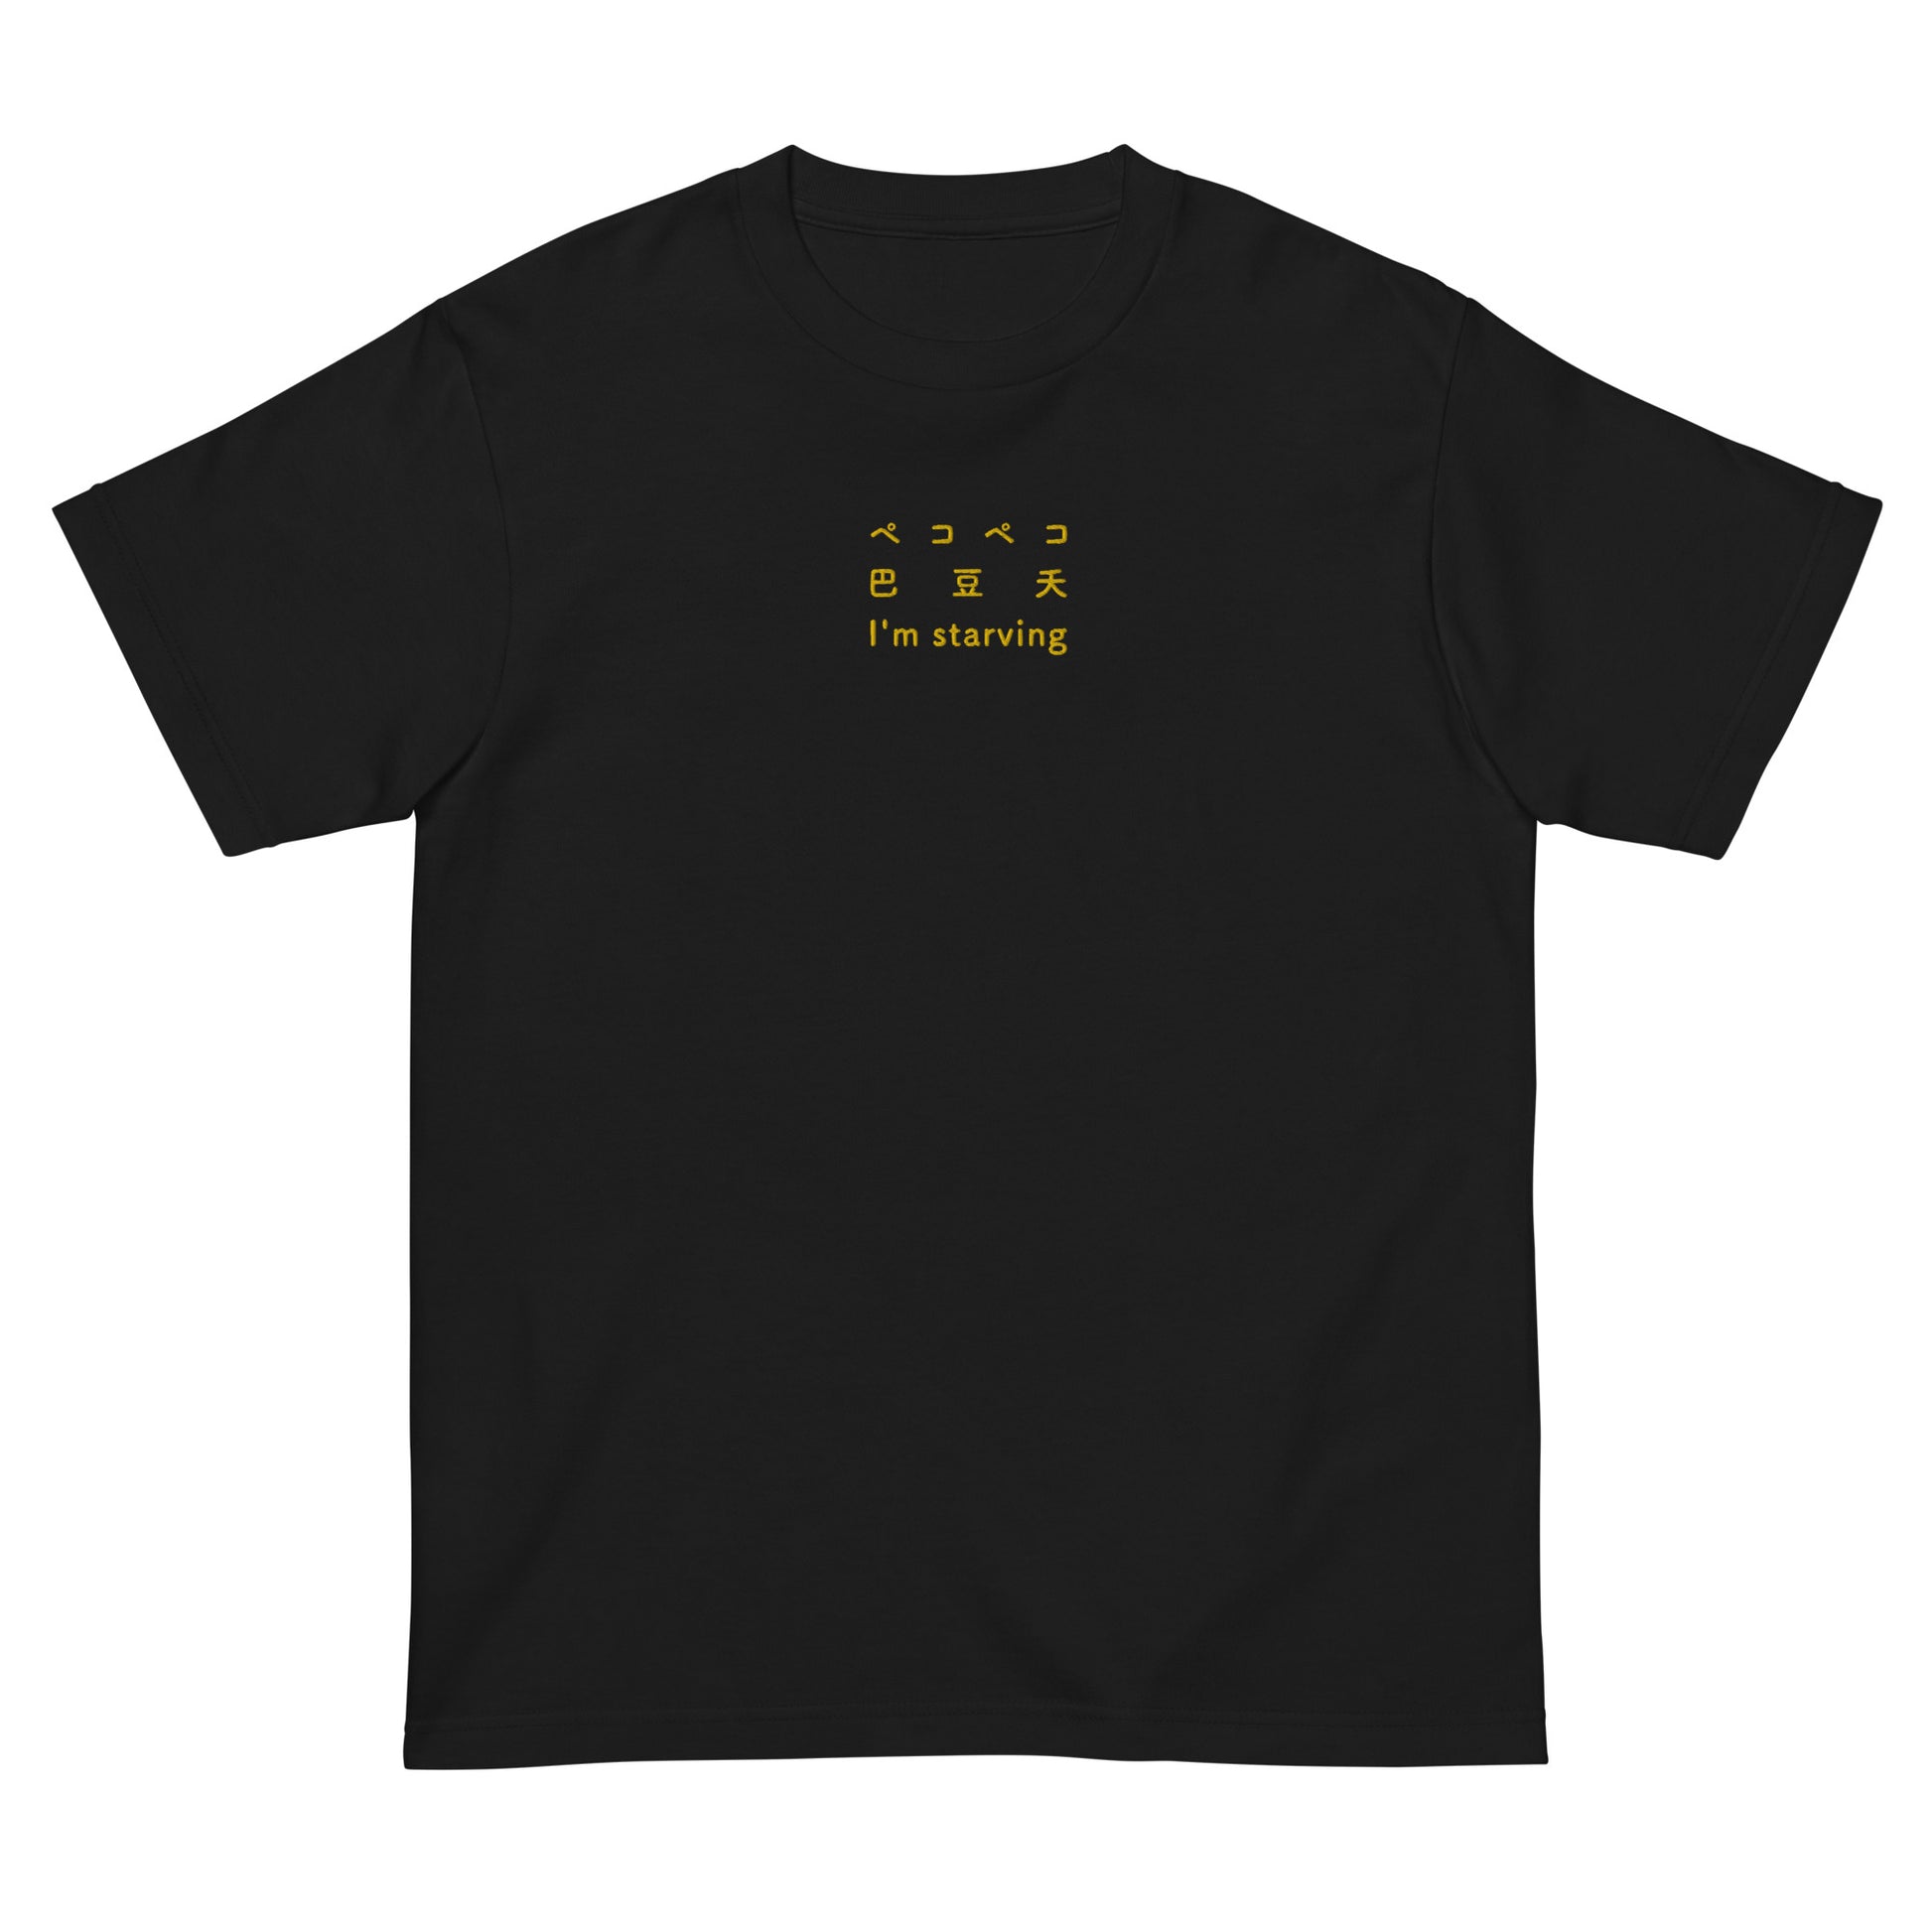 Black High Quality Tee - Front Design with an Yellow Embroidery "I'm Starving" in three languages